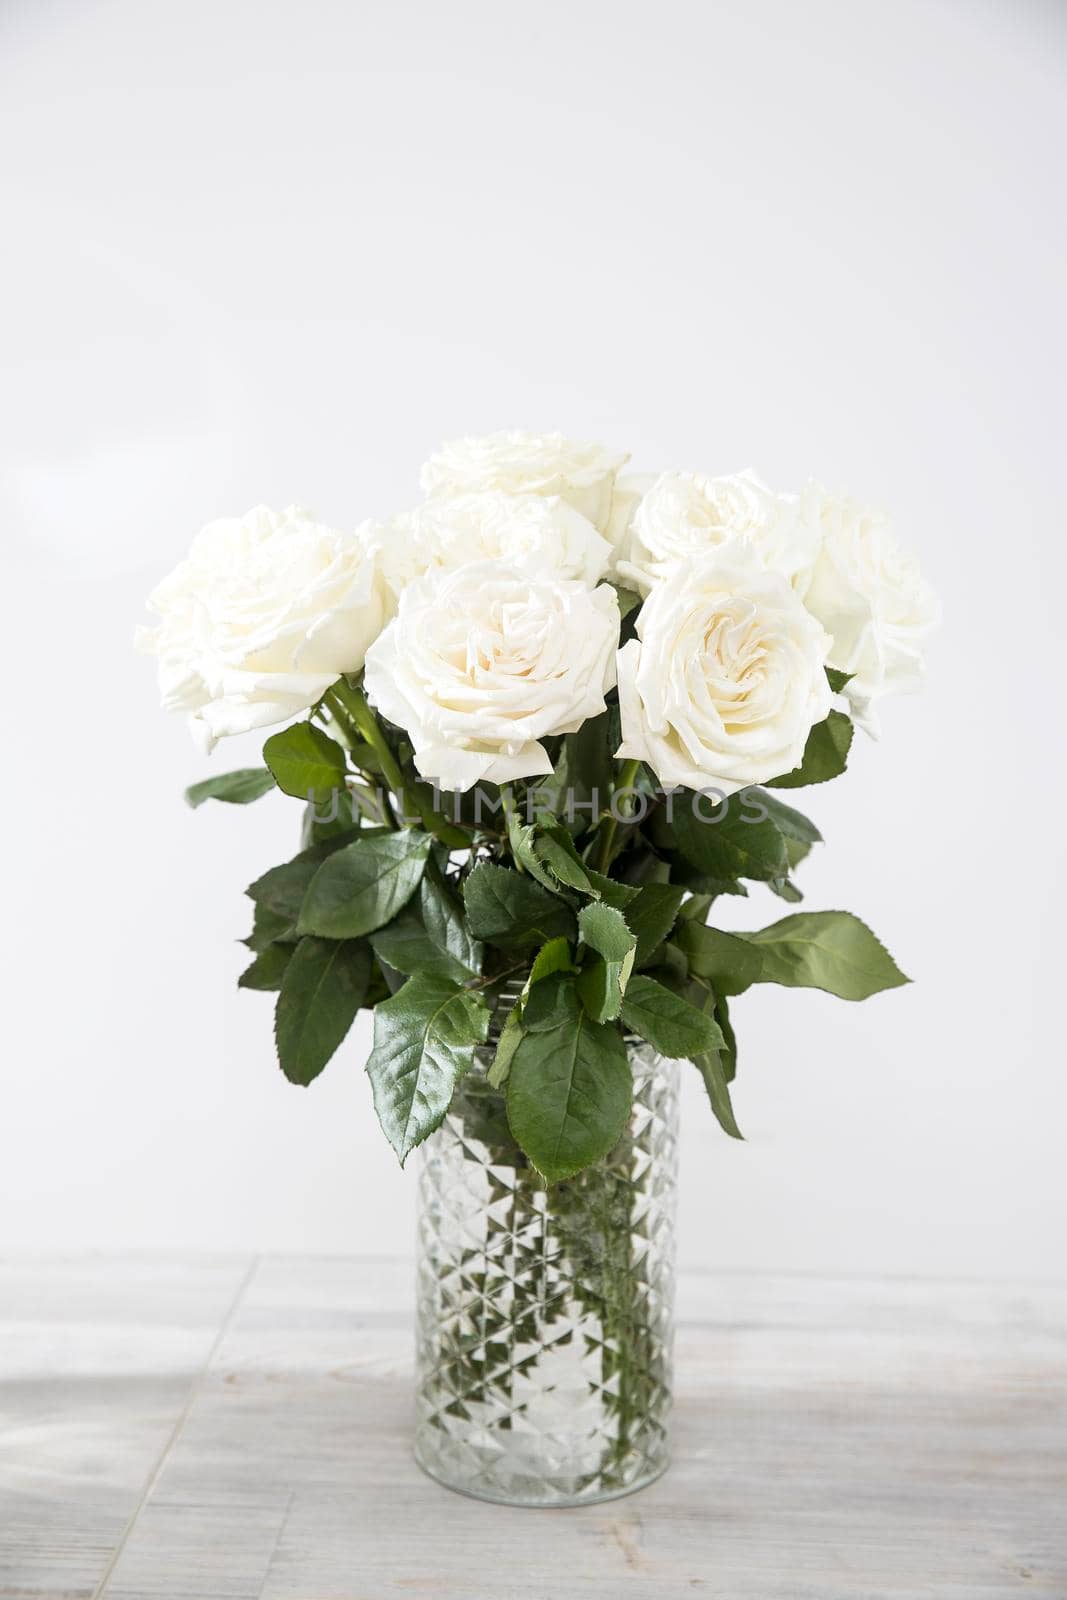 Bouquet of white roses in a glass vase on a beige table against a gray wall. Copy space. by elenarostunova